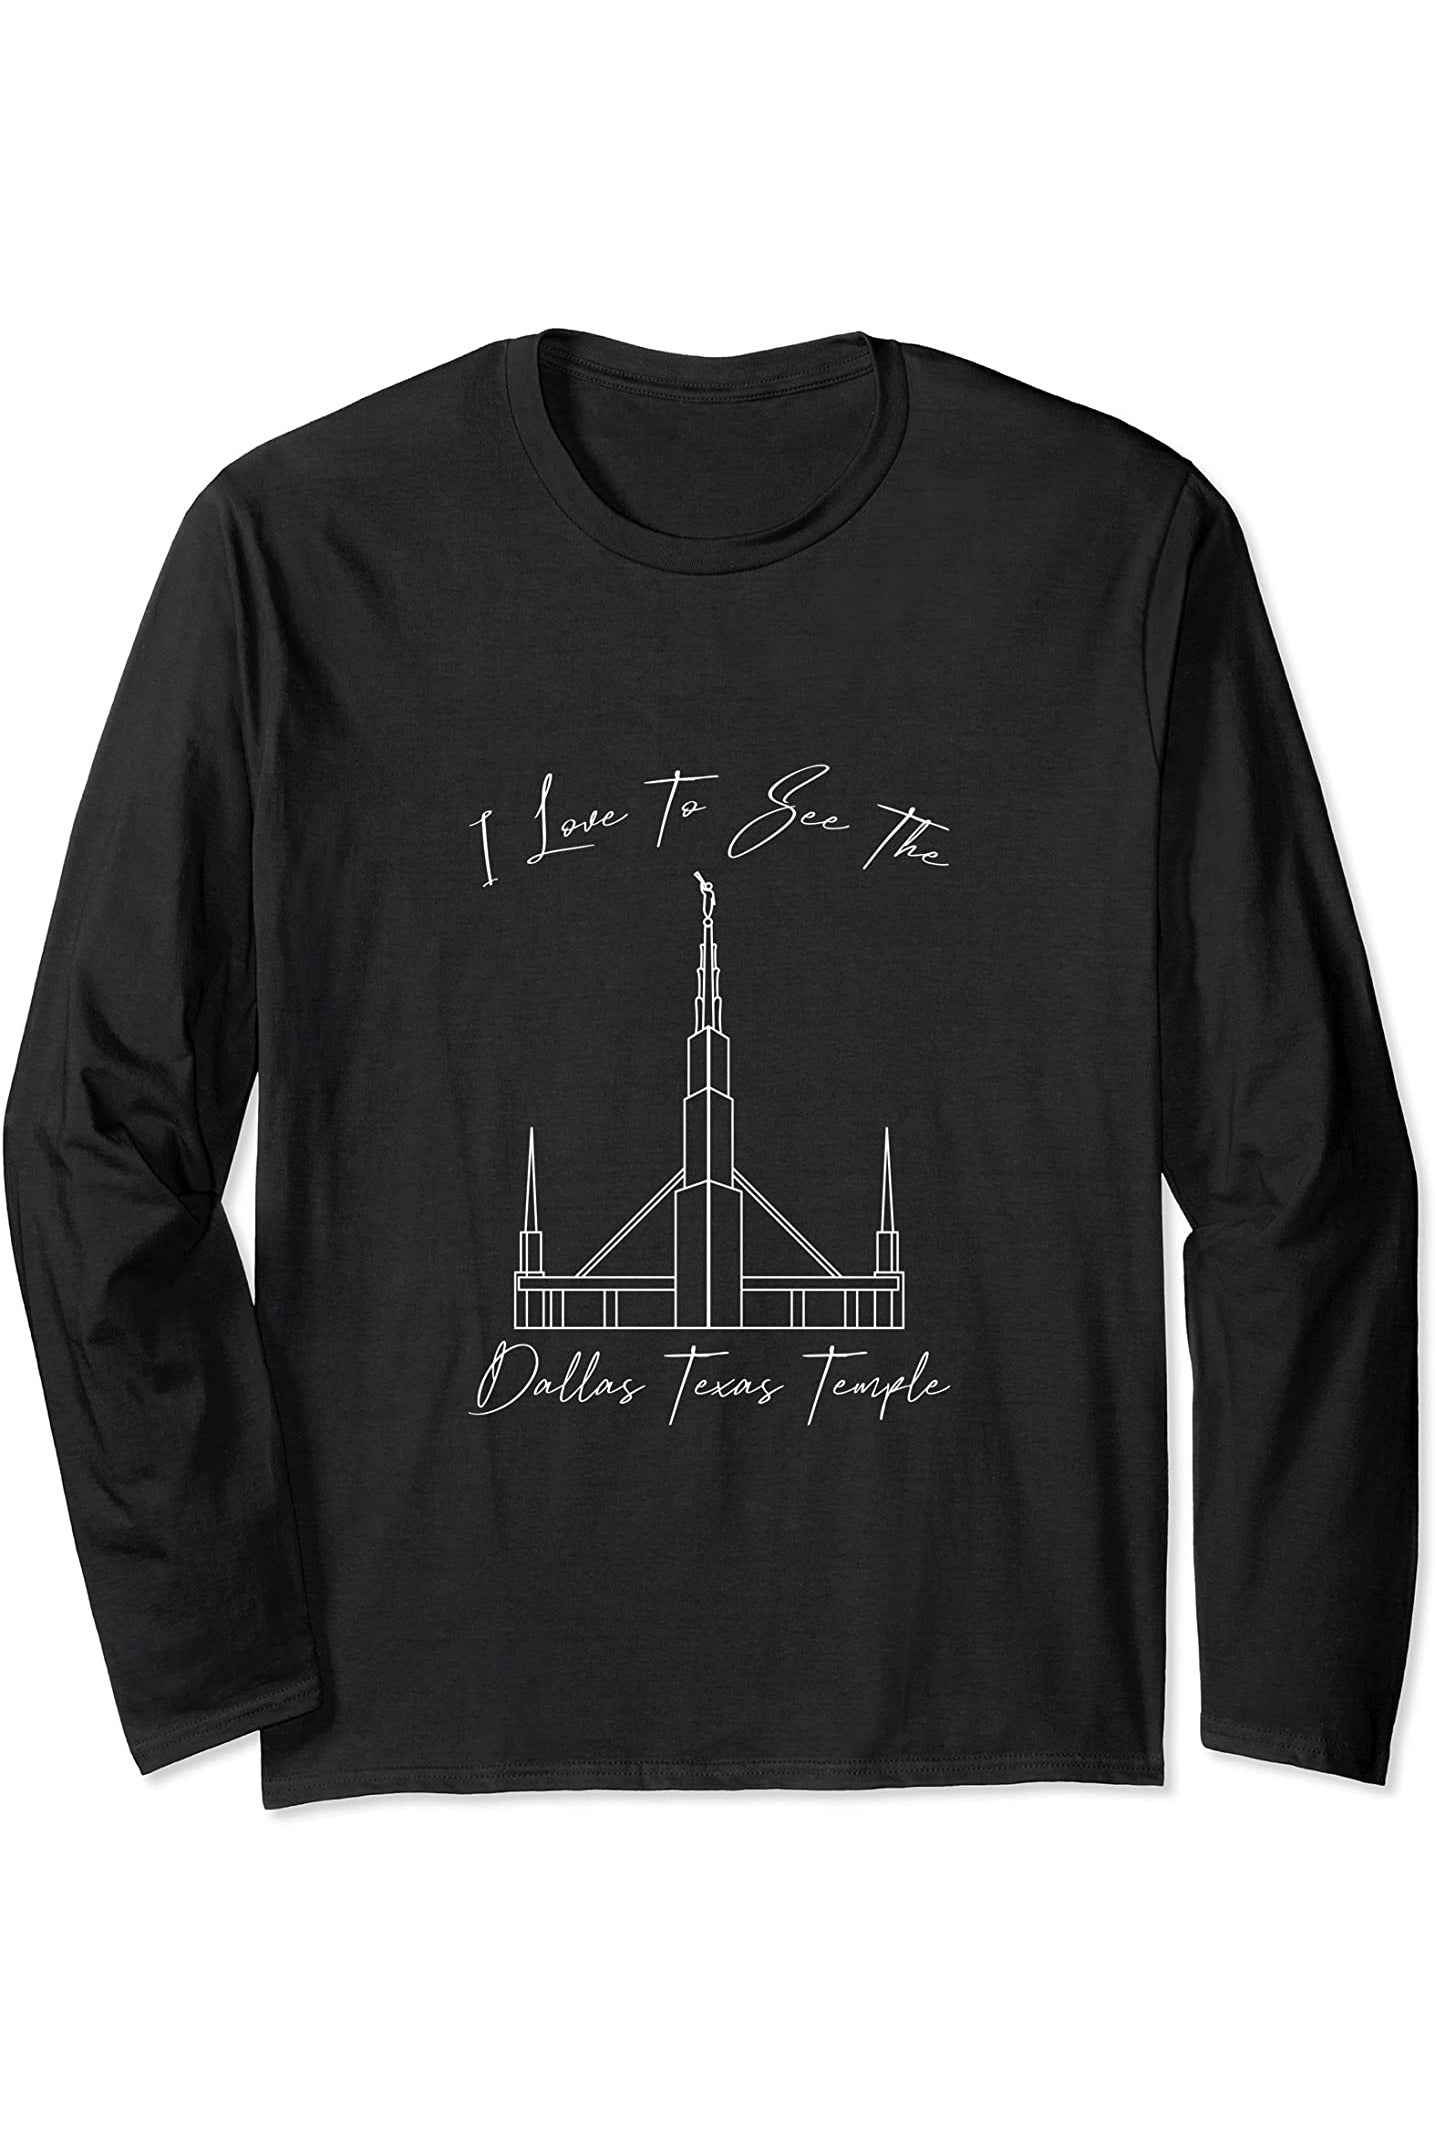 Dallas Texas Temple Long Sleeve T-Shirt - Calligraphy Style (English) US